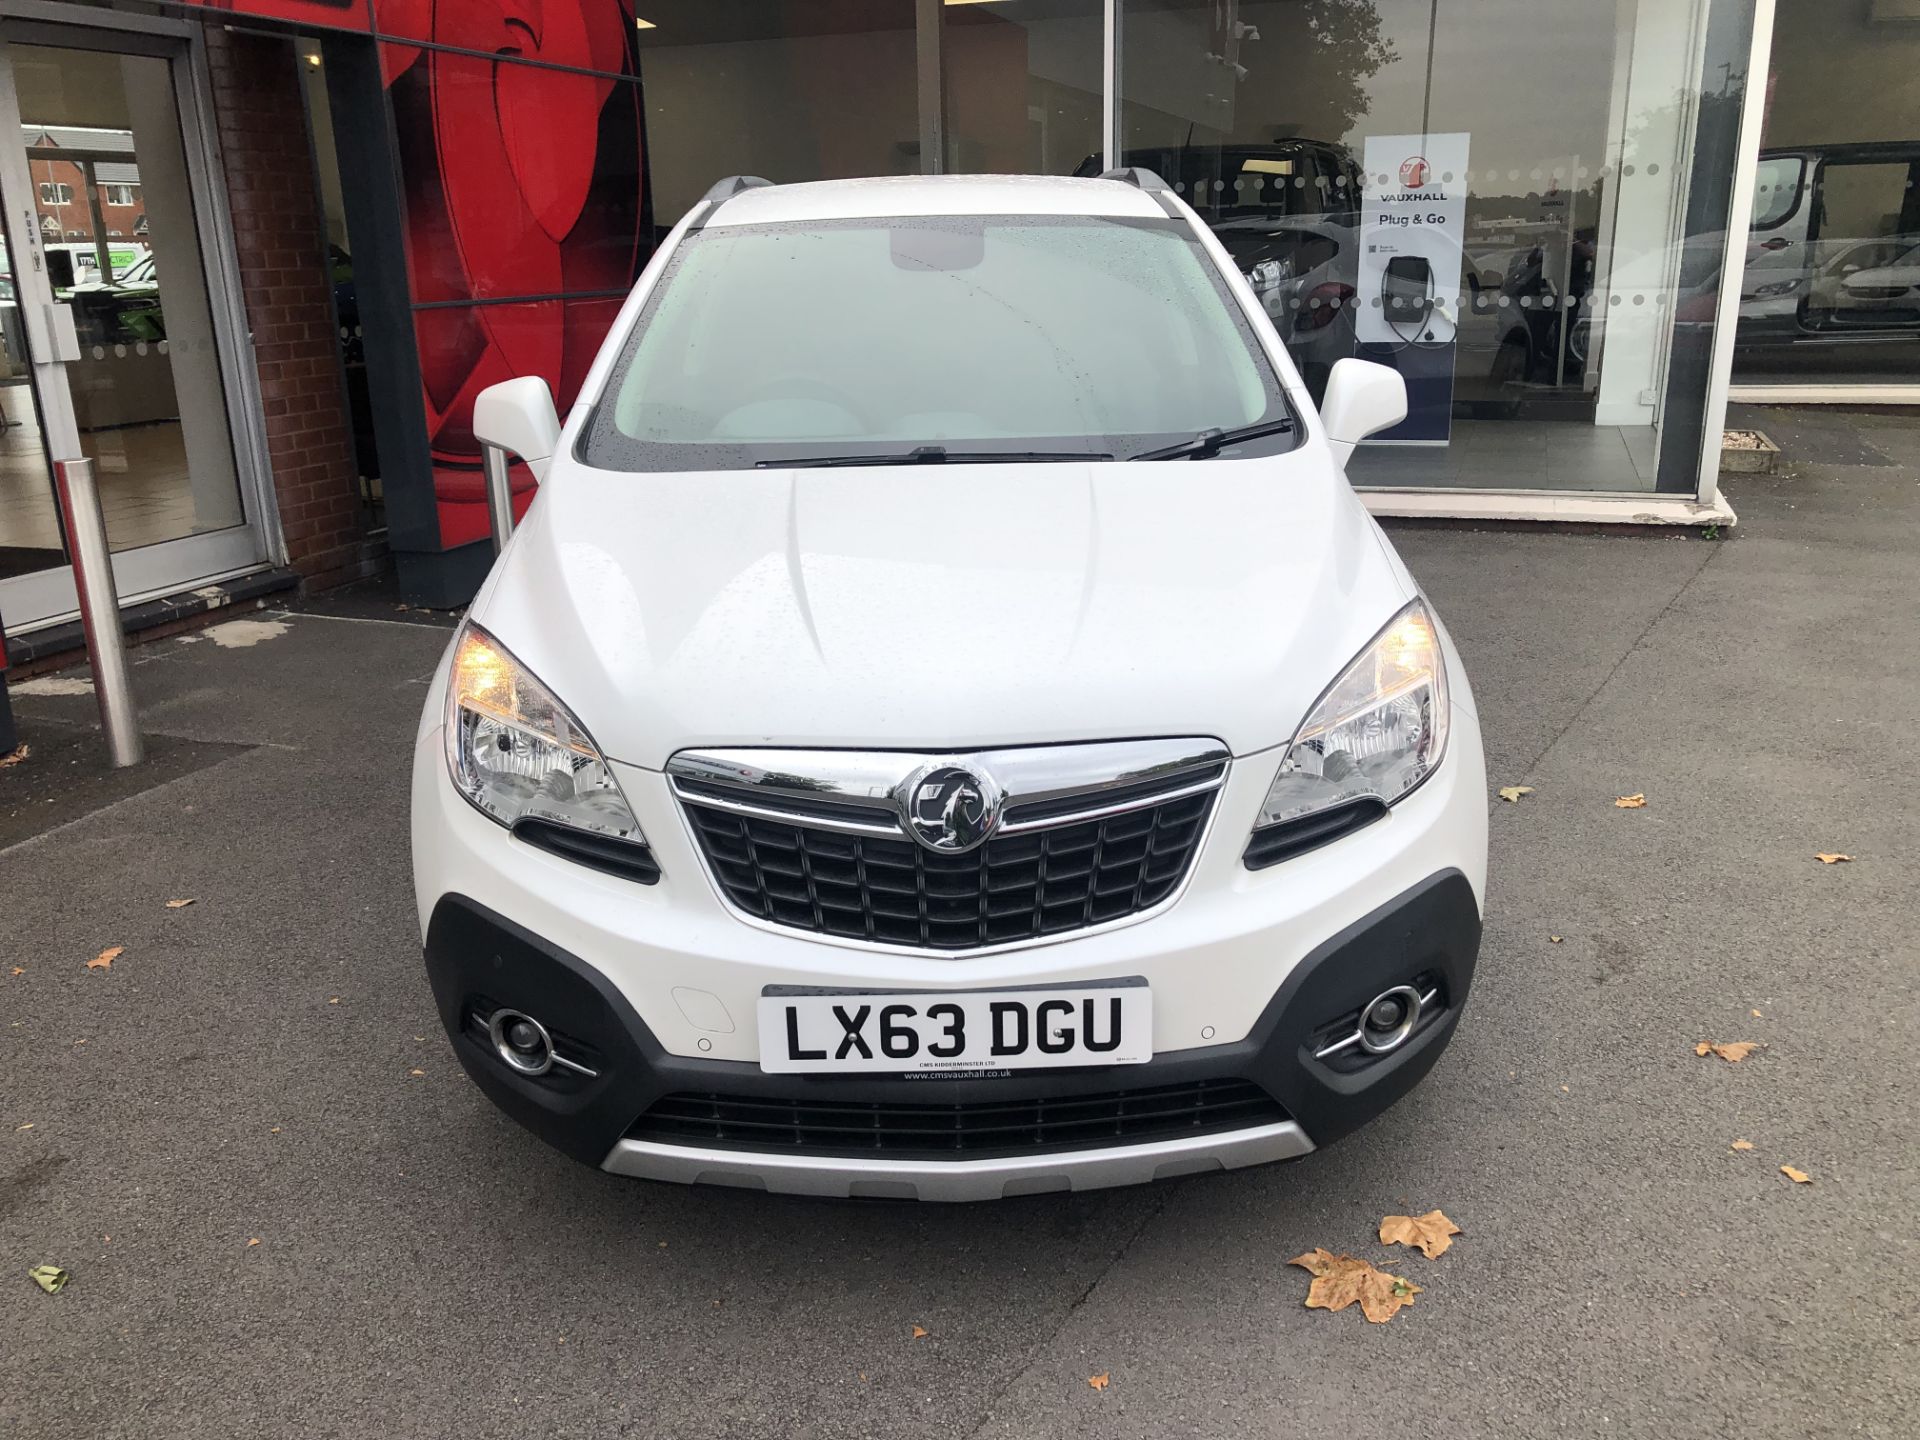 Vauxhall Mokka 1.7 CDTi (130ps) SE 5dr Automatic, Registration: LX63DGU, Date First Registered: 28/ - Image 3 of 7